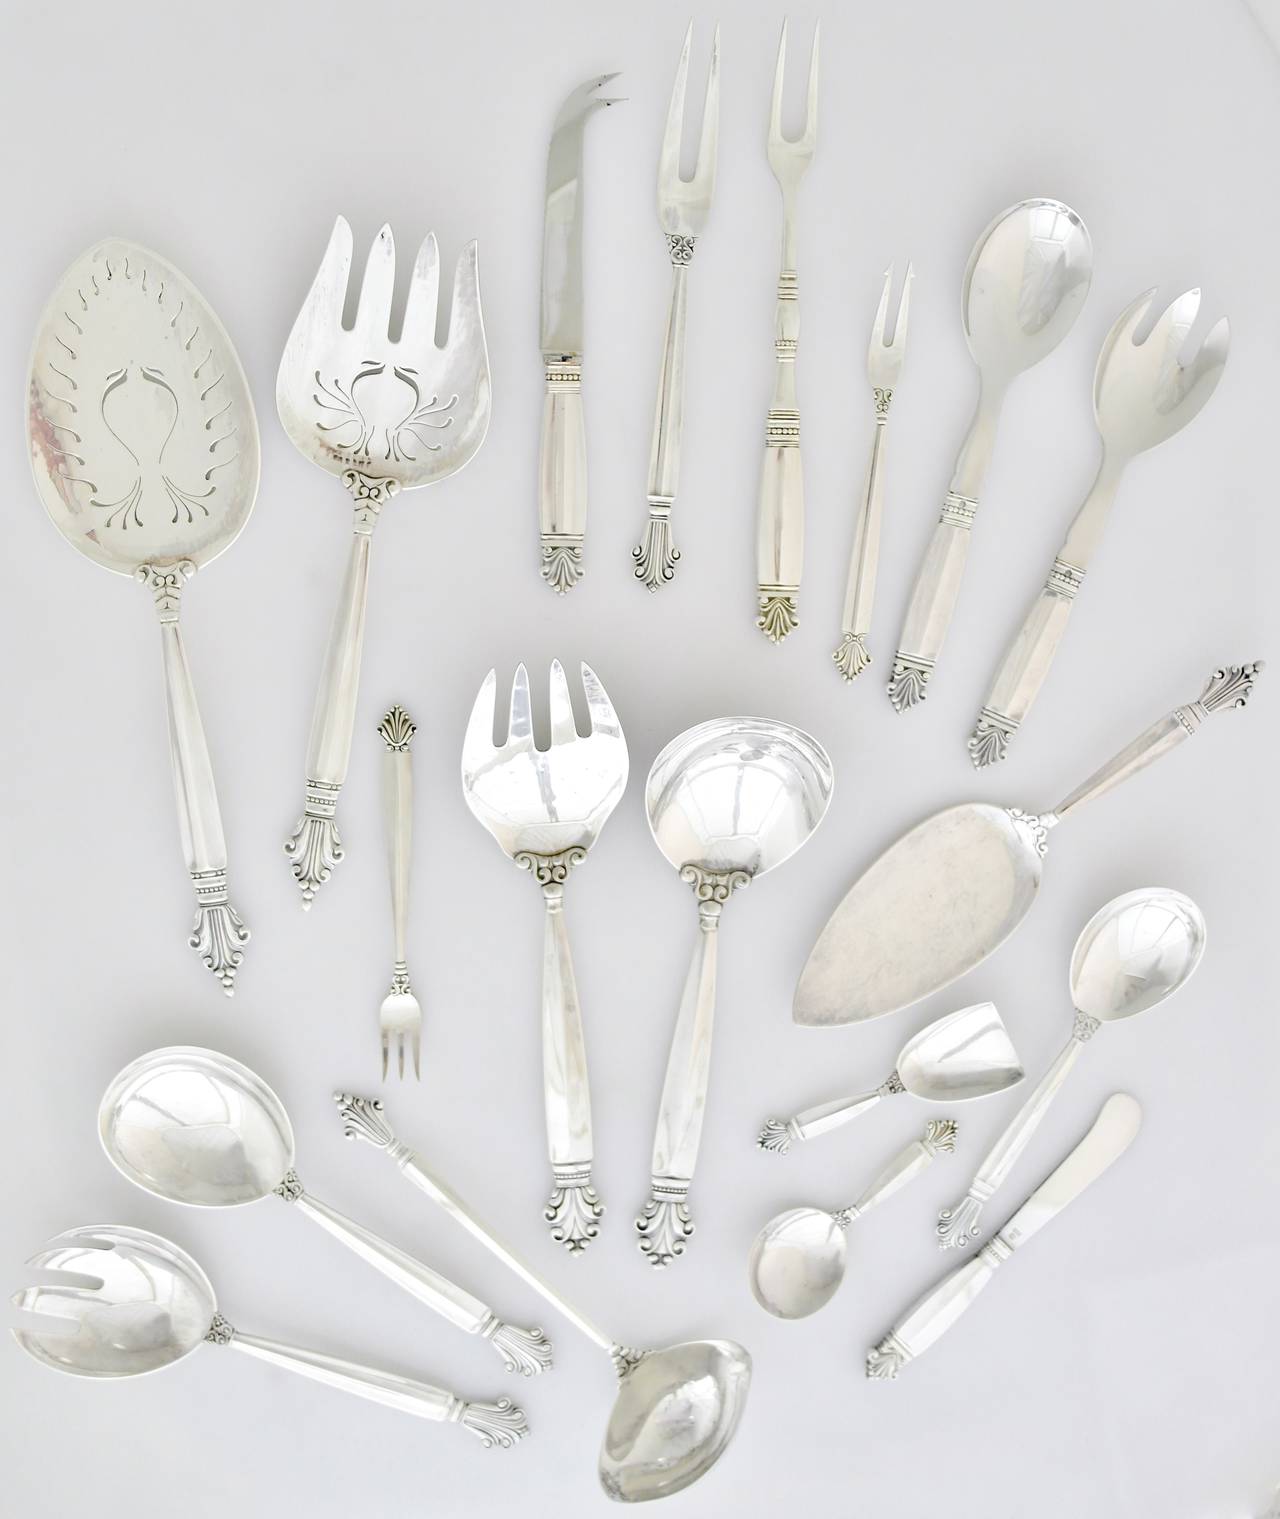 Offering a large sterling silver flatware set by Georg Jensen of Denmark, comprising a place setting of 13 pieces for 12 guests including many rare and hard to find serving pieces. The Acanthus pattern was designed by Johan Rohde in 1917.  The Acorn